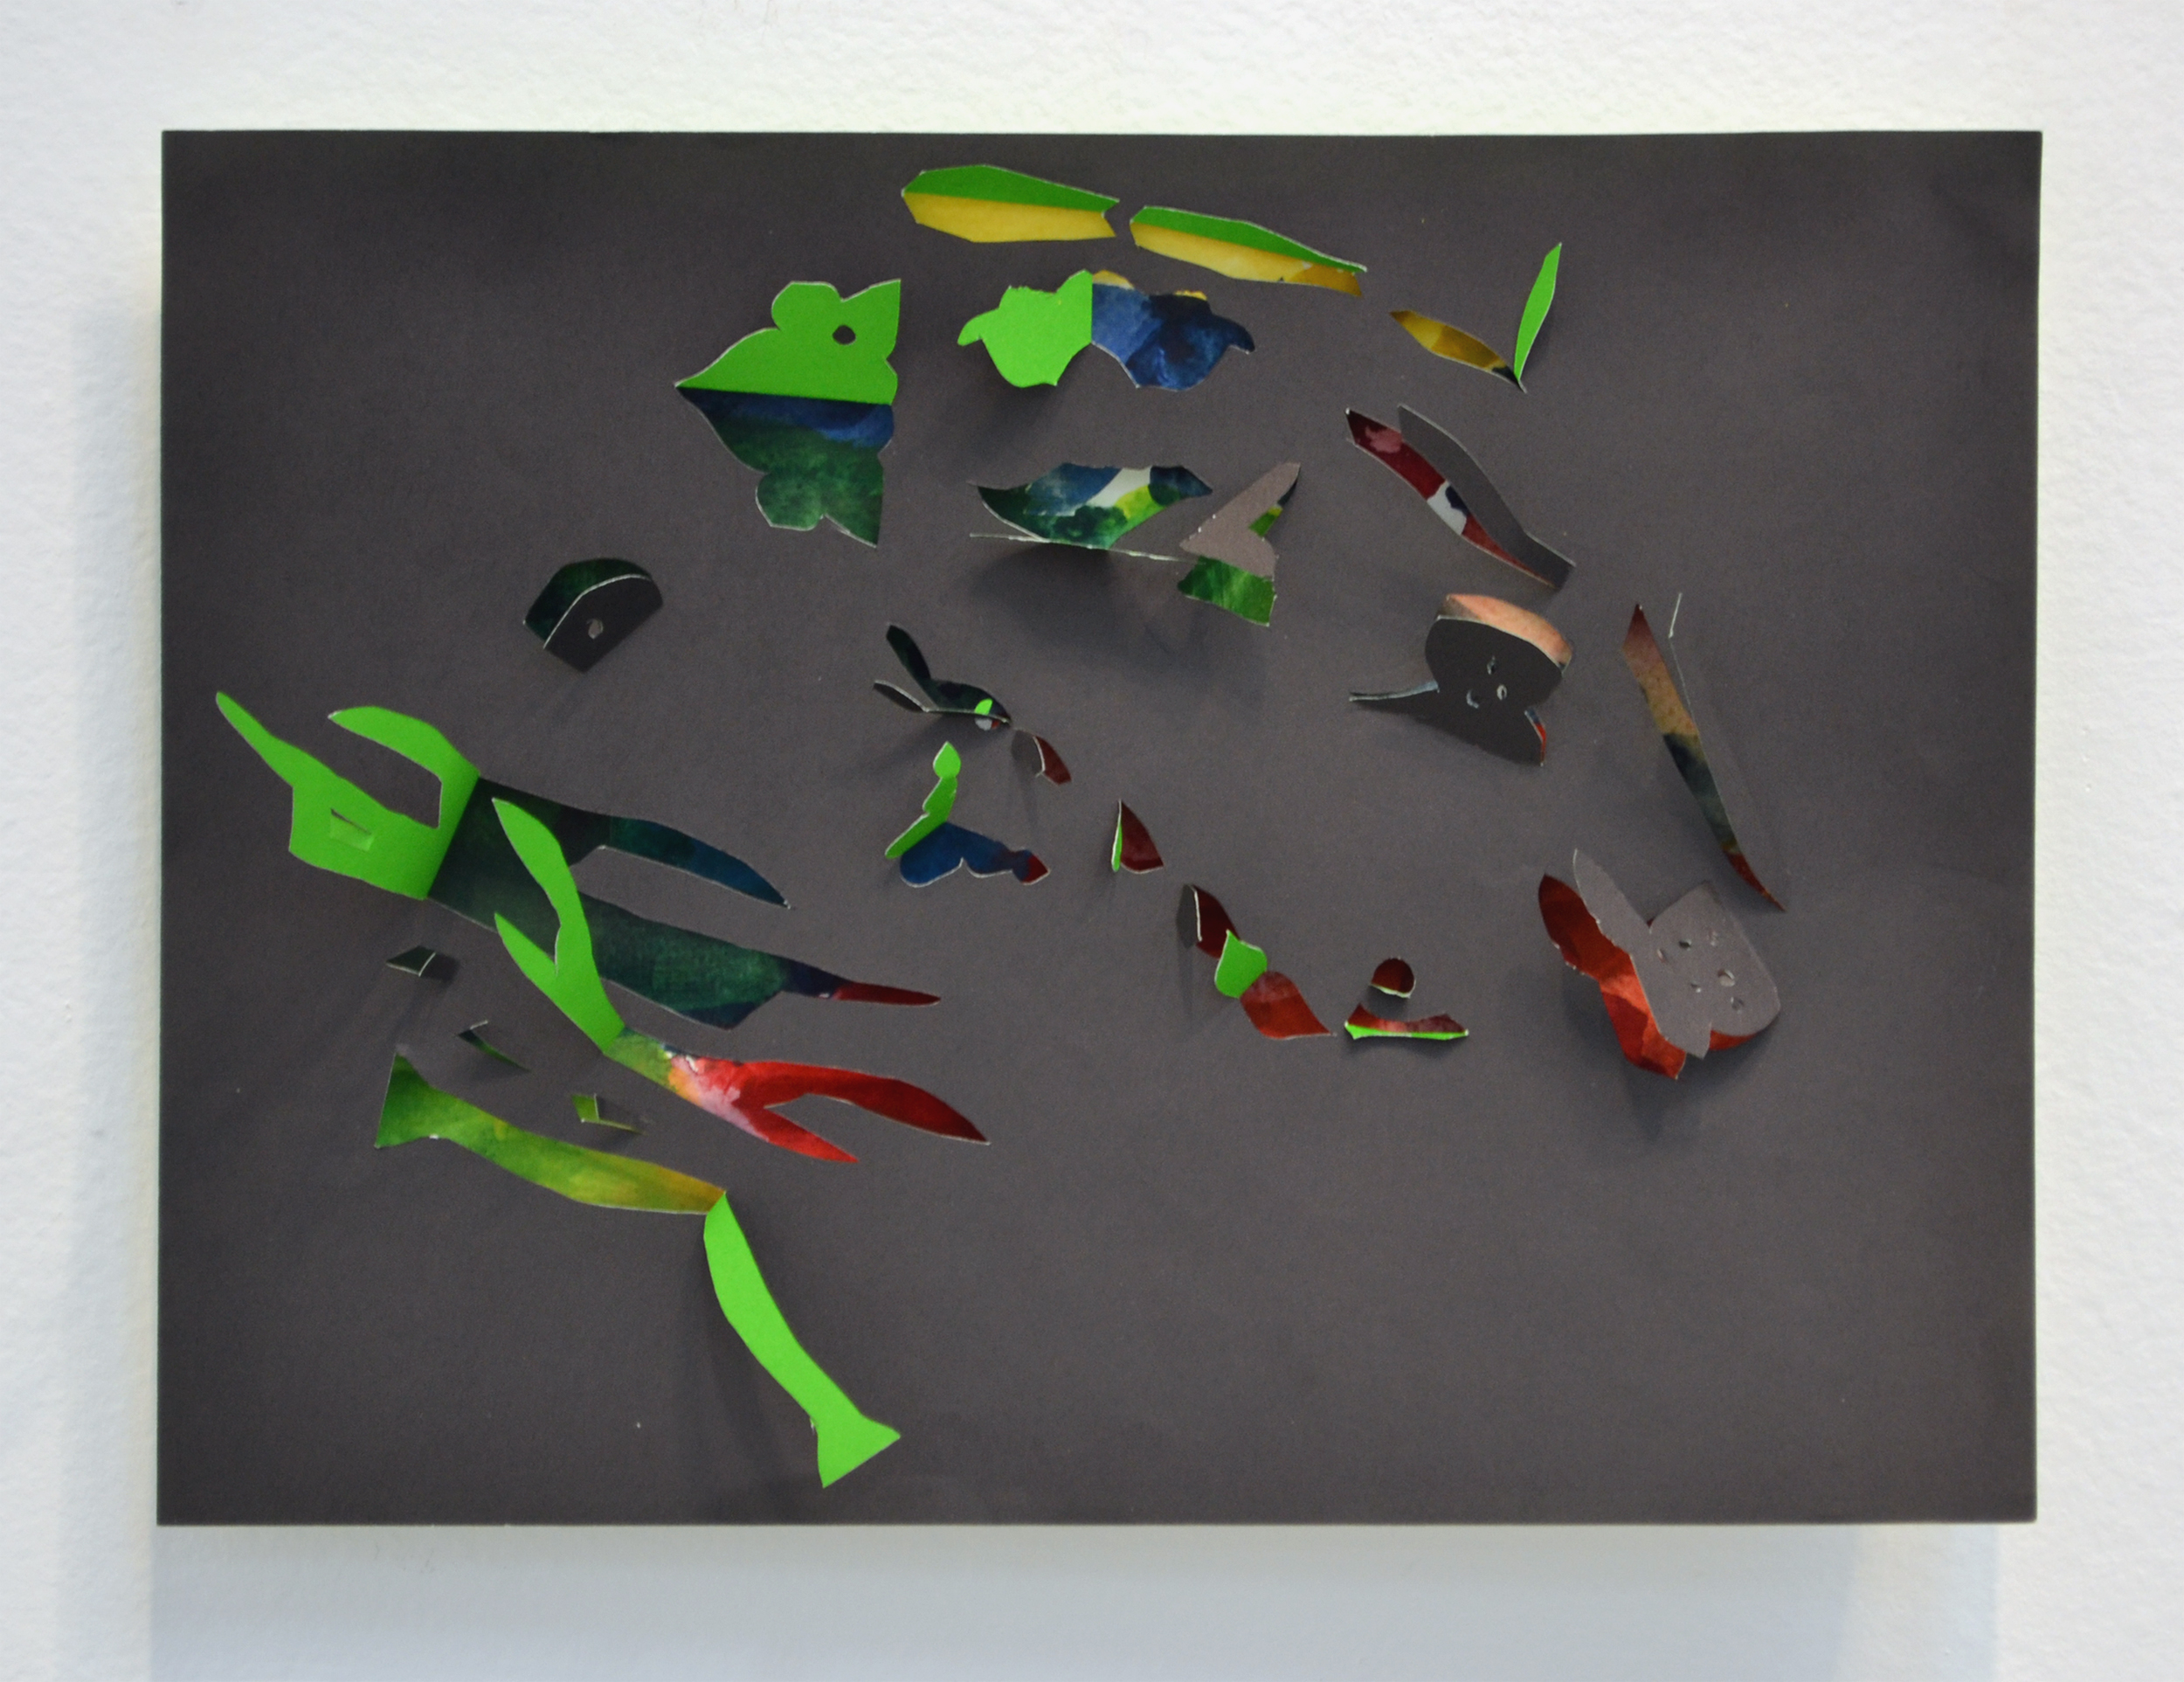 Black paper with shapes cut out, multi-colored paper showing through